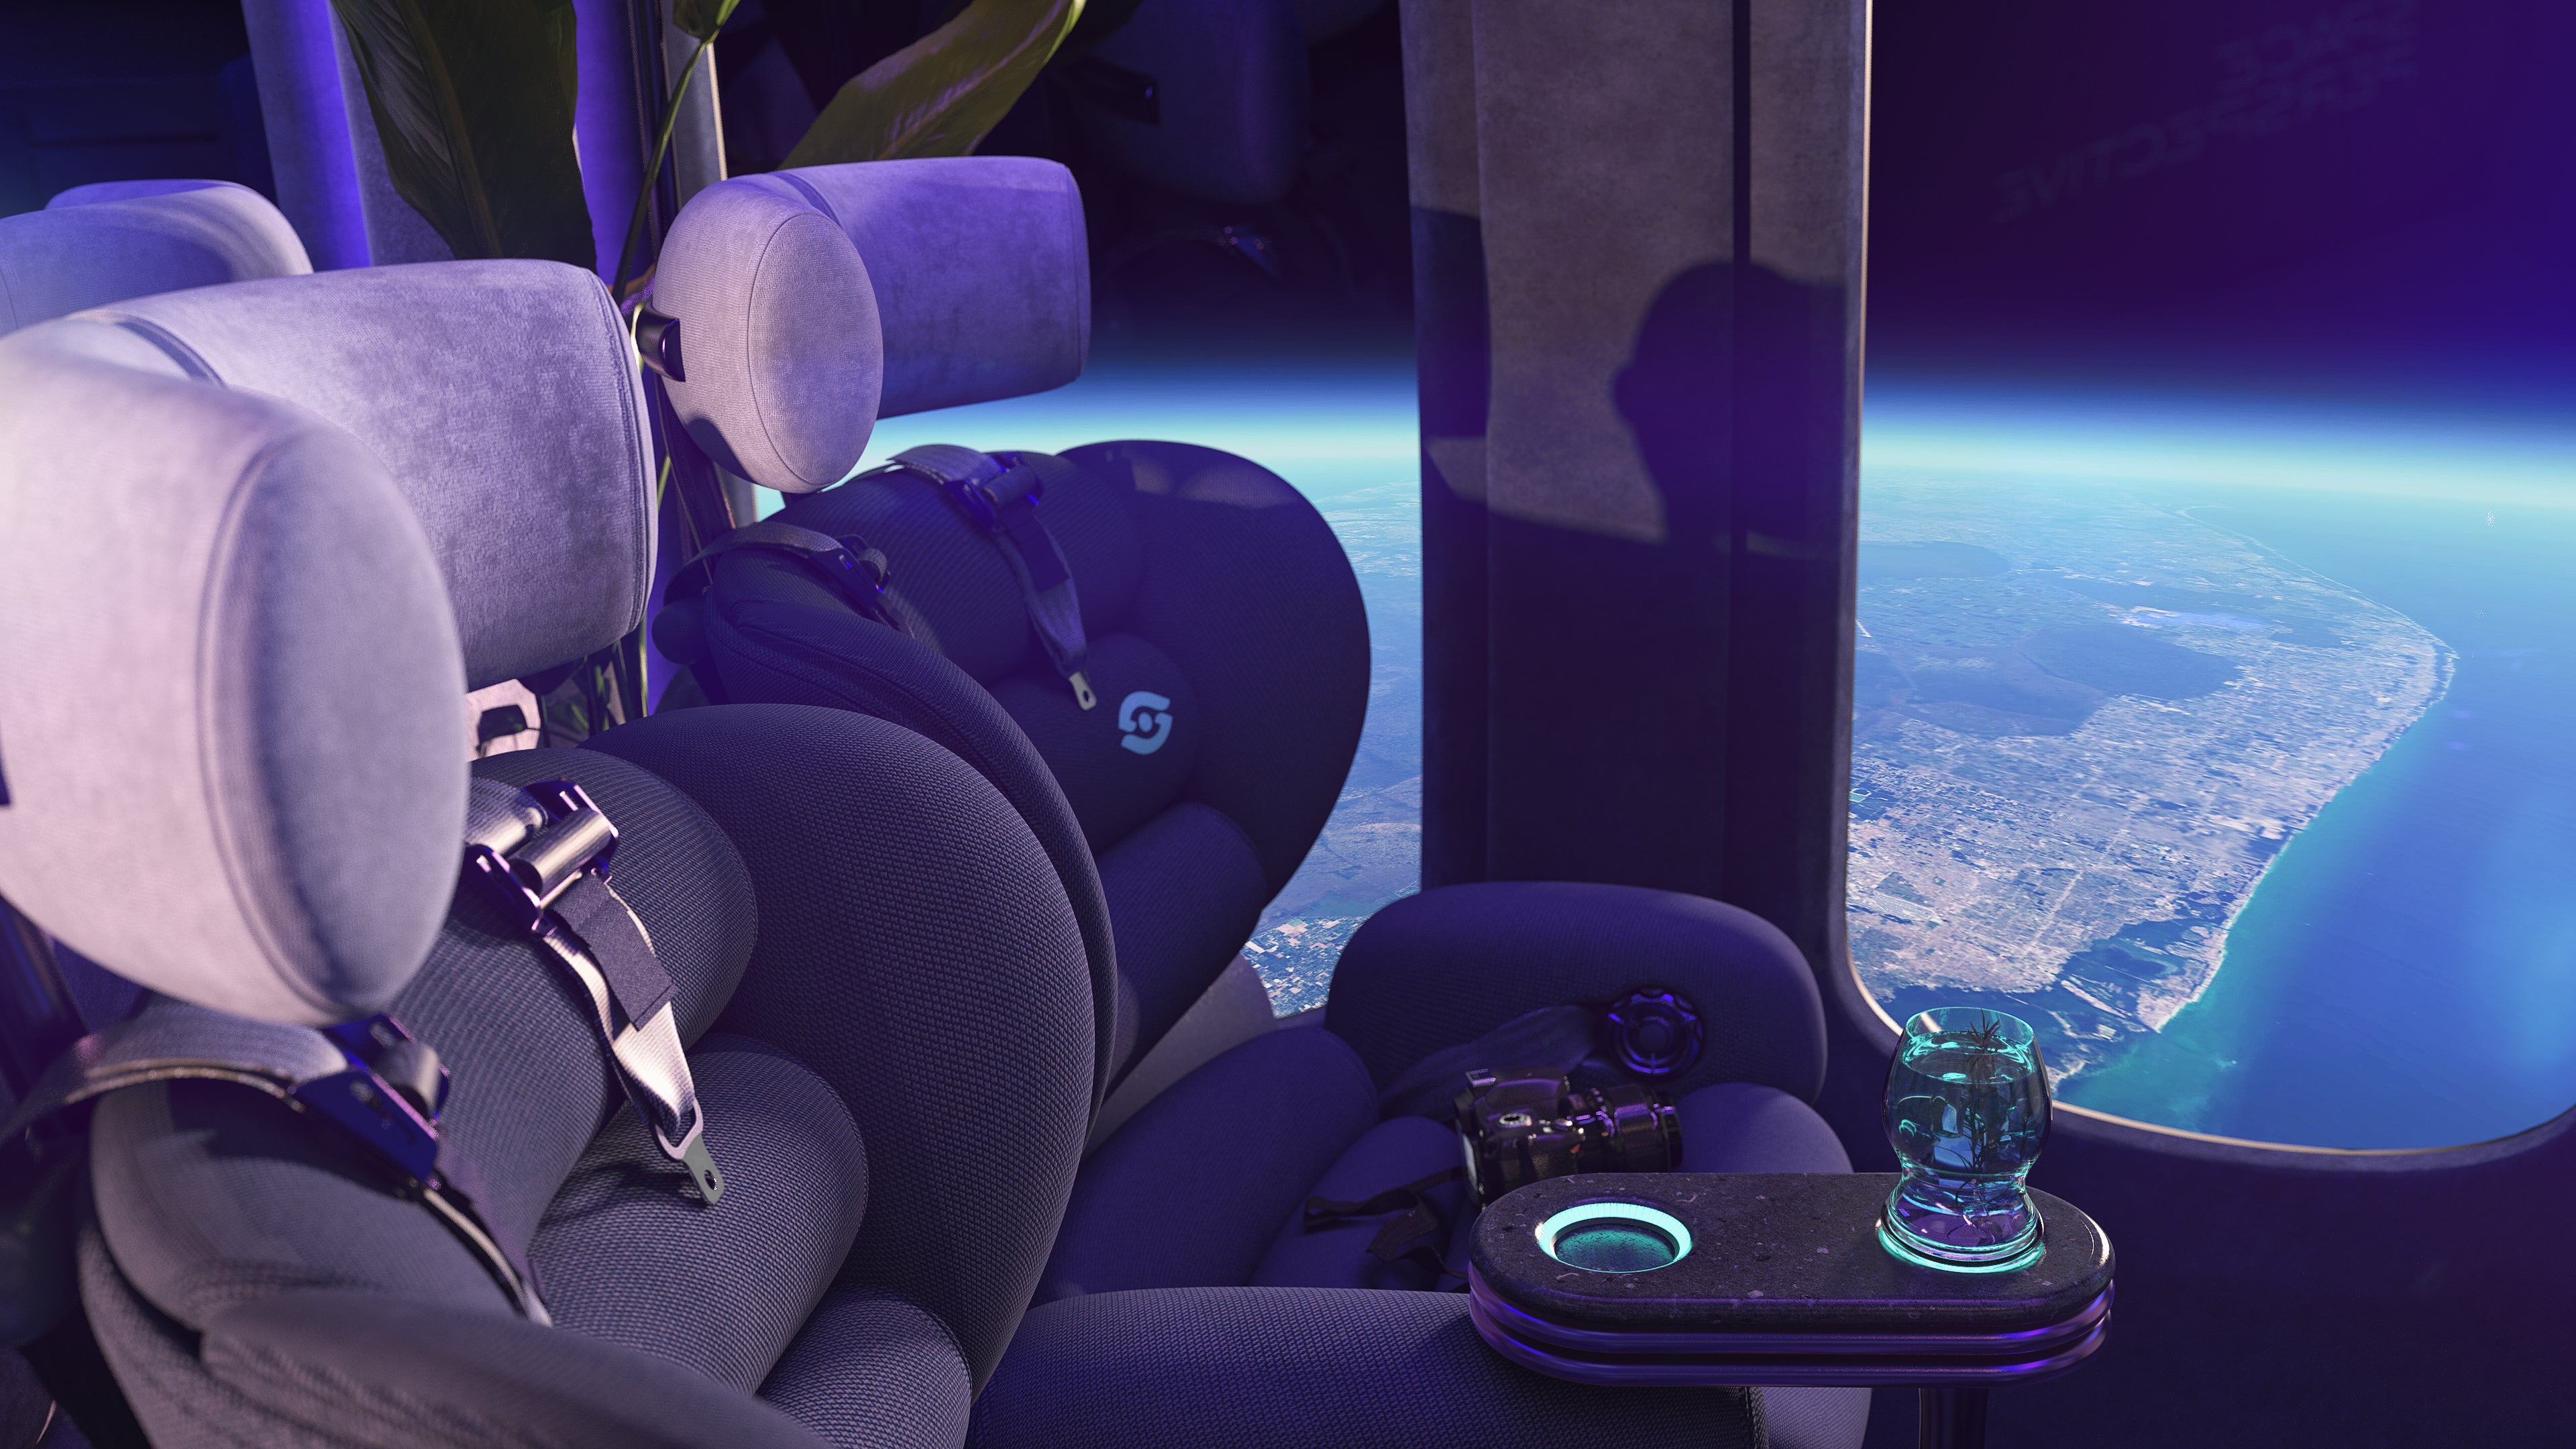 The orientation of the seats can be configured for intimate one-on-one experiences.  (Image: Space Perspective)